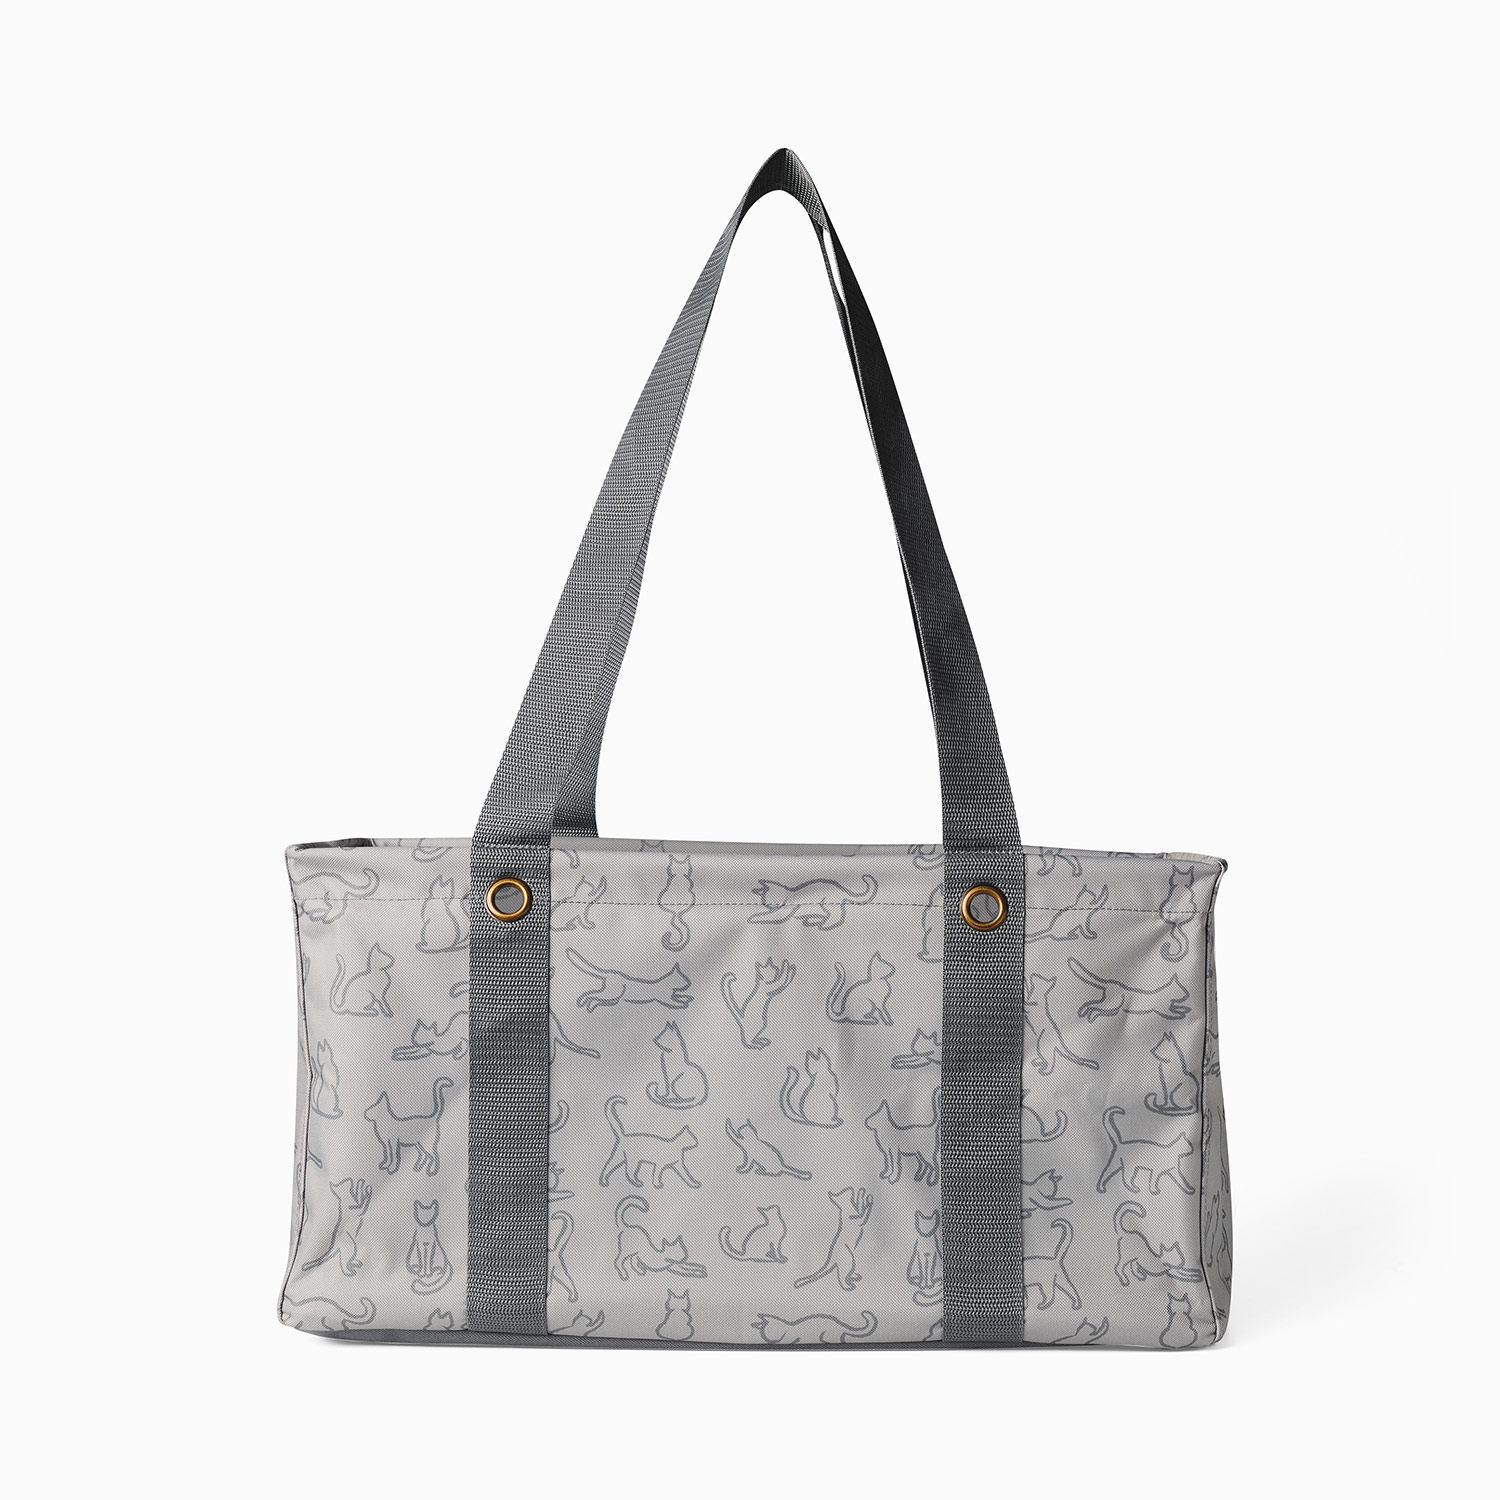 Charcoal Crosshatch - Medium Utility Tote - Thirty-One Gifts